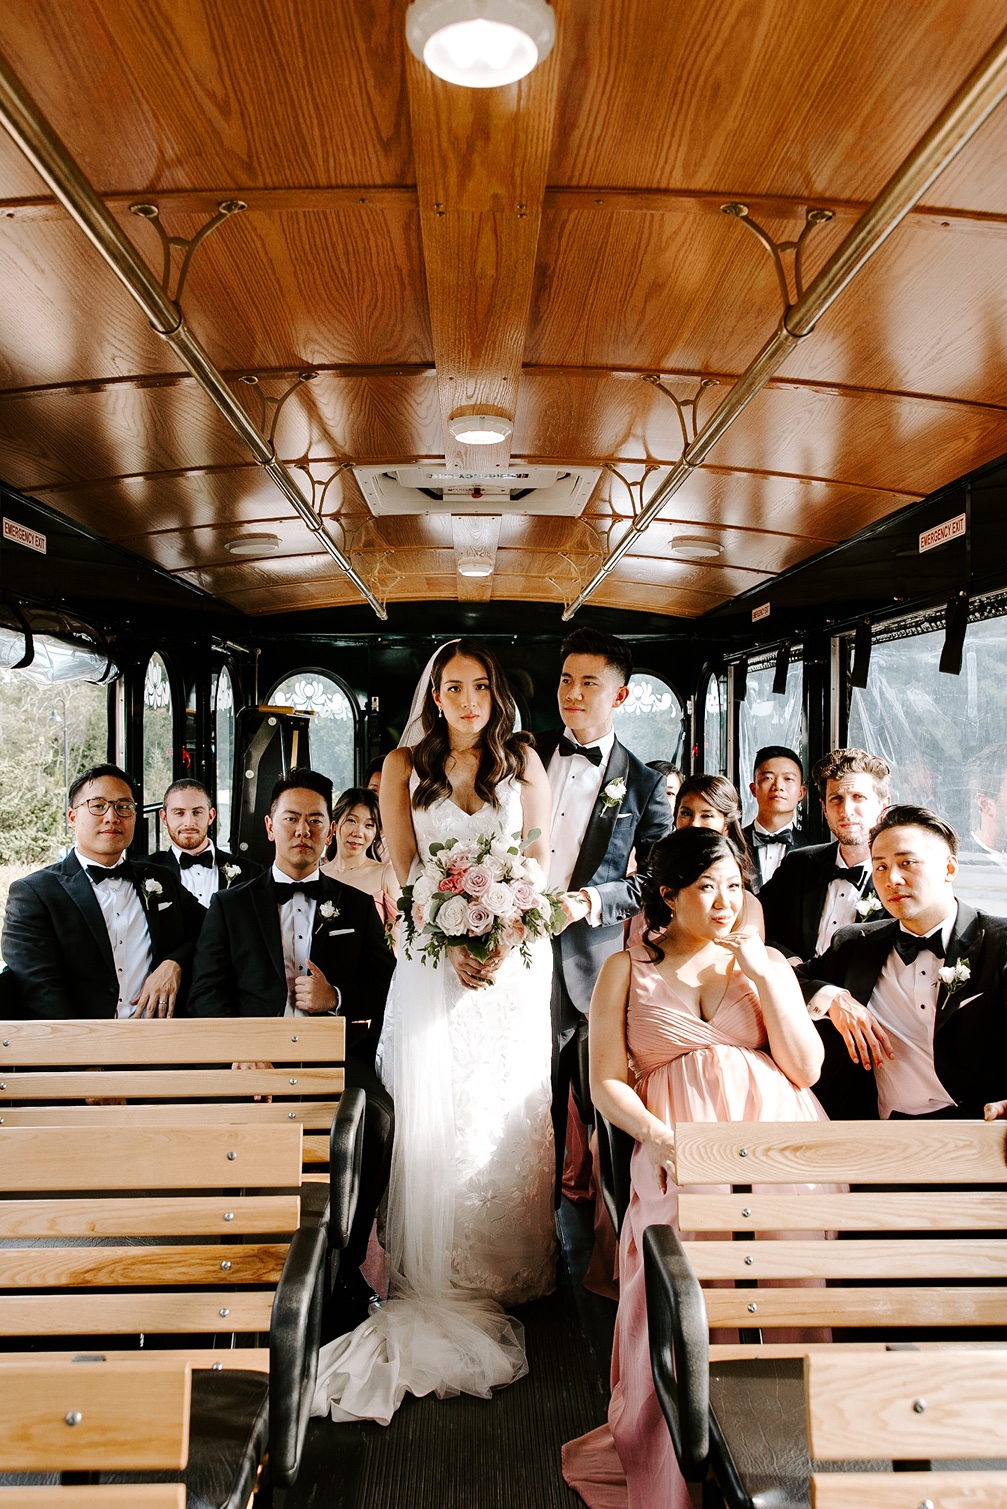 Bride and groom with wedding party on trolley